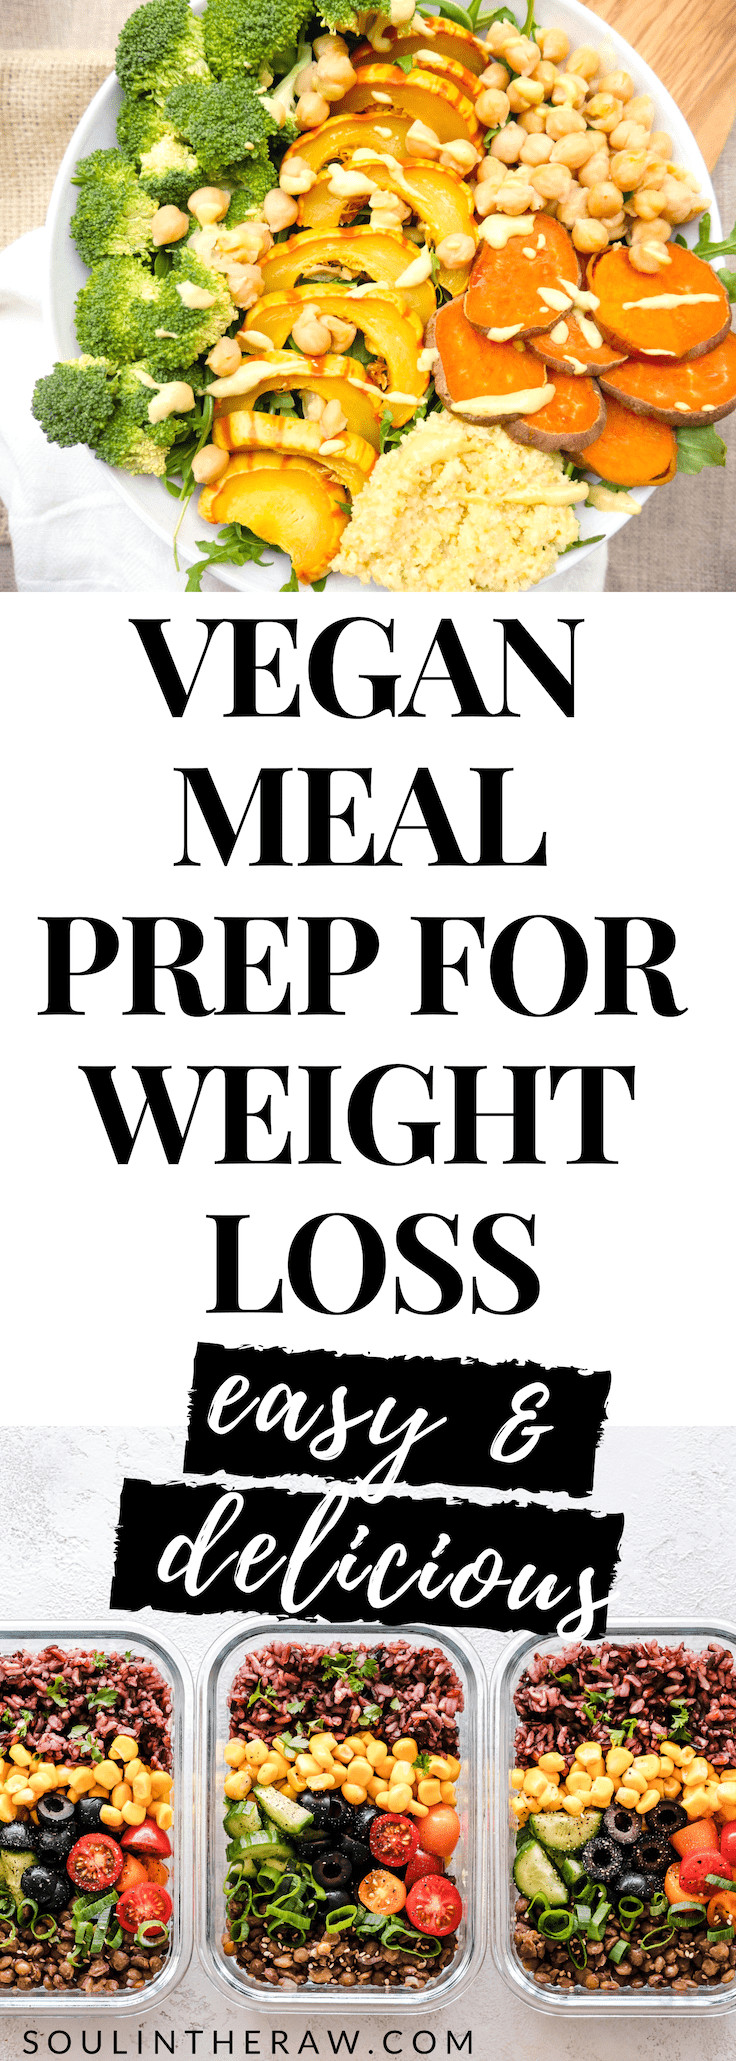 Plant Based Diet Meal Plan Losing Weight
 Plant Based Diet Weight Loss The Vegan Meal Prep Plan